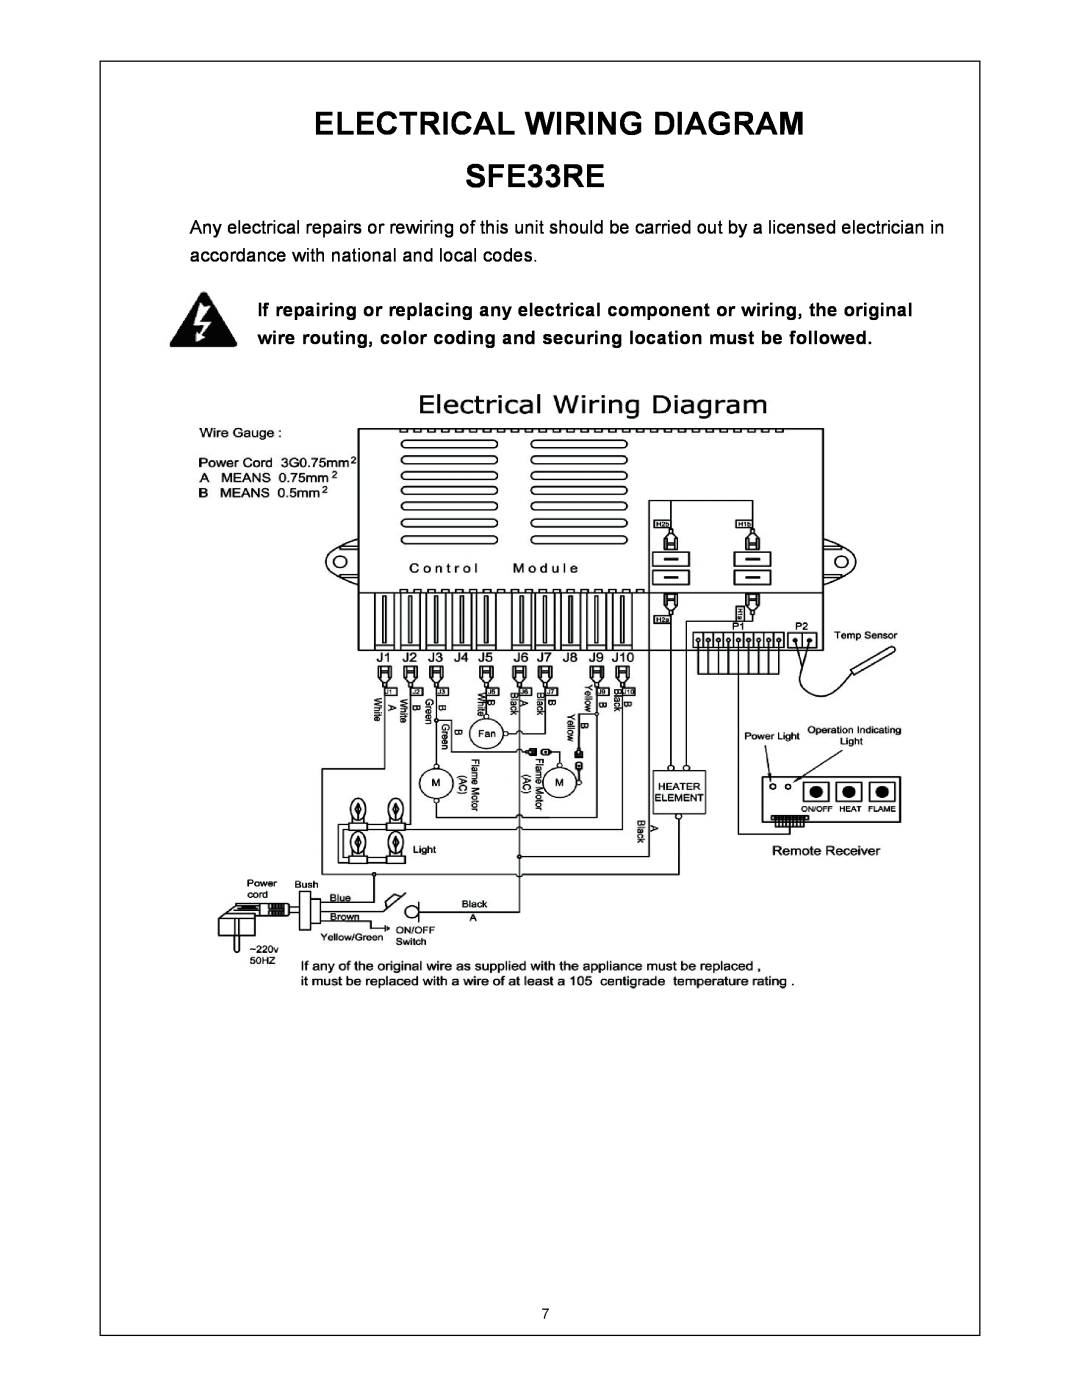 Procom SFE23RE installation instructions ELECTRICAL WIRING DIAGRAM SFE33RE 